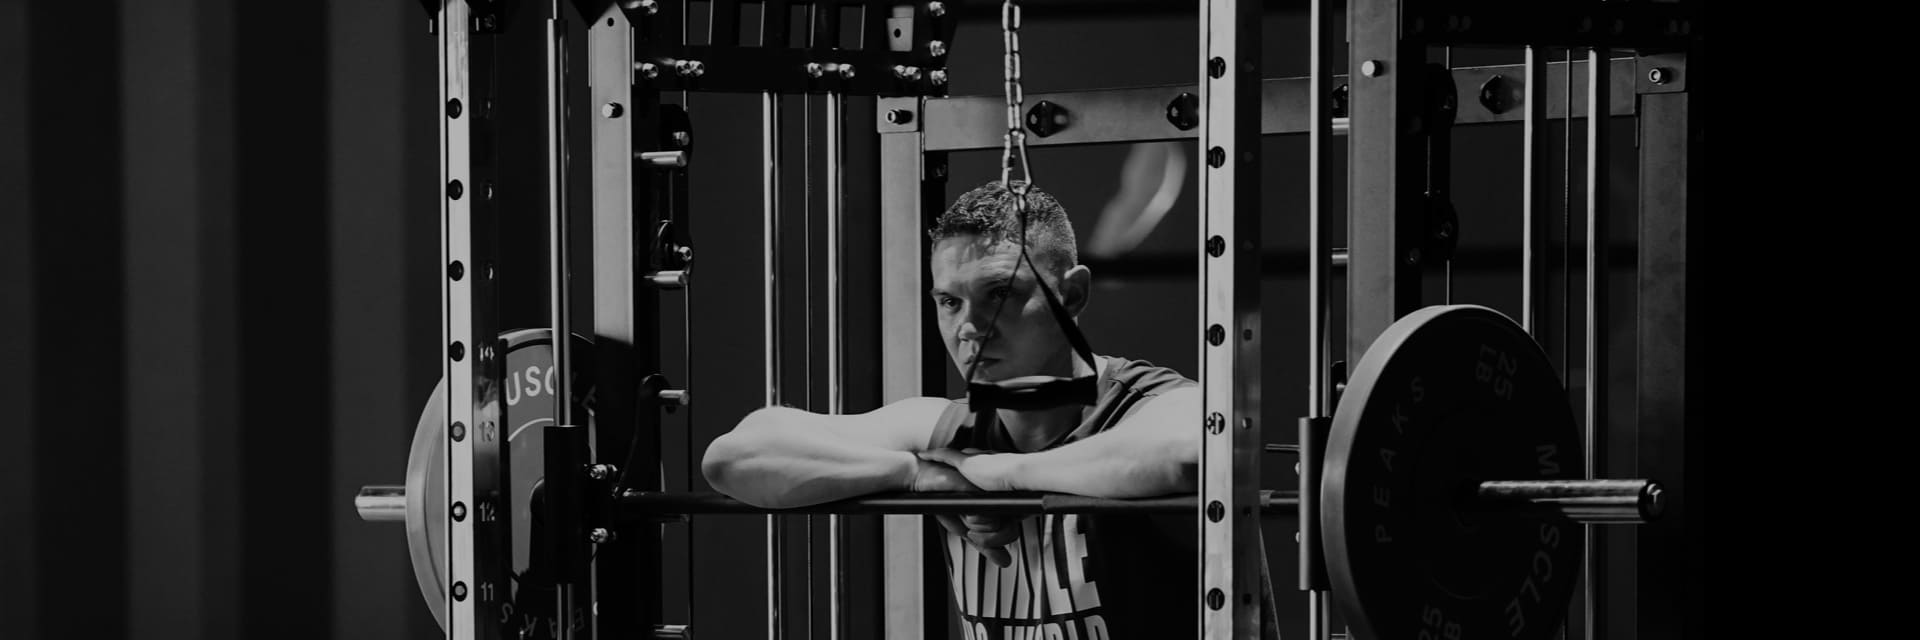 Smith Machine Packages